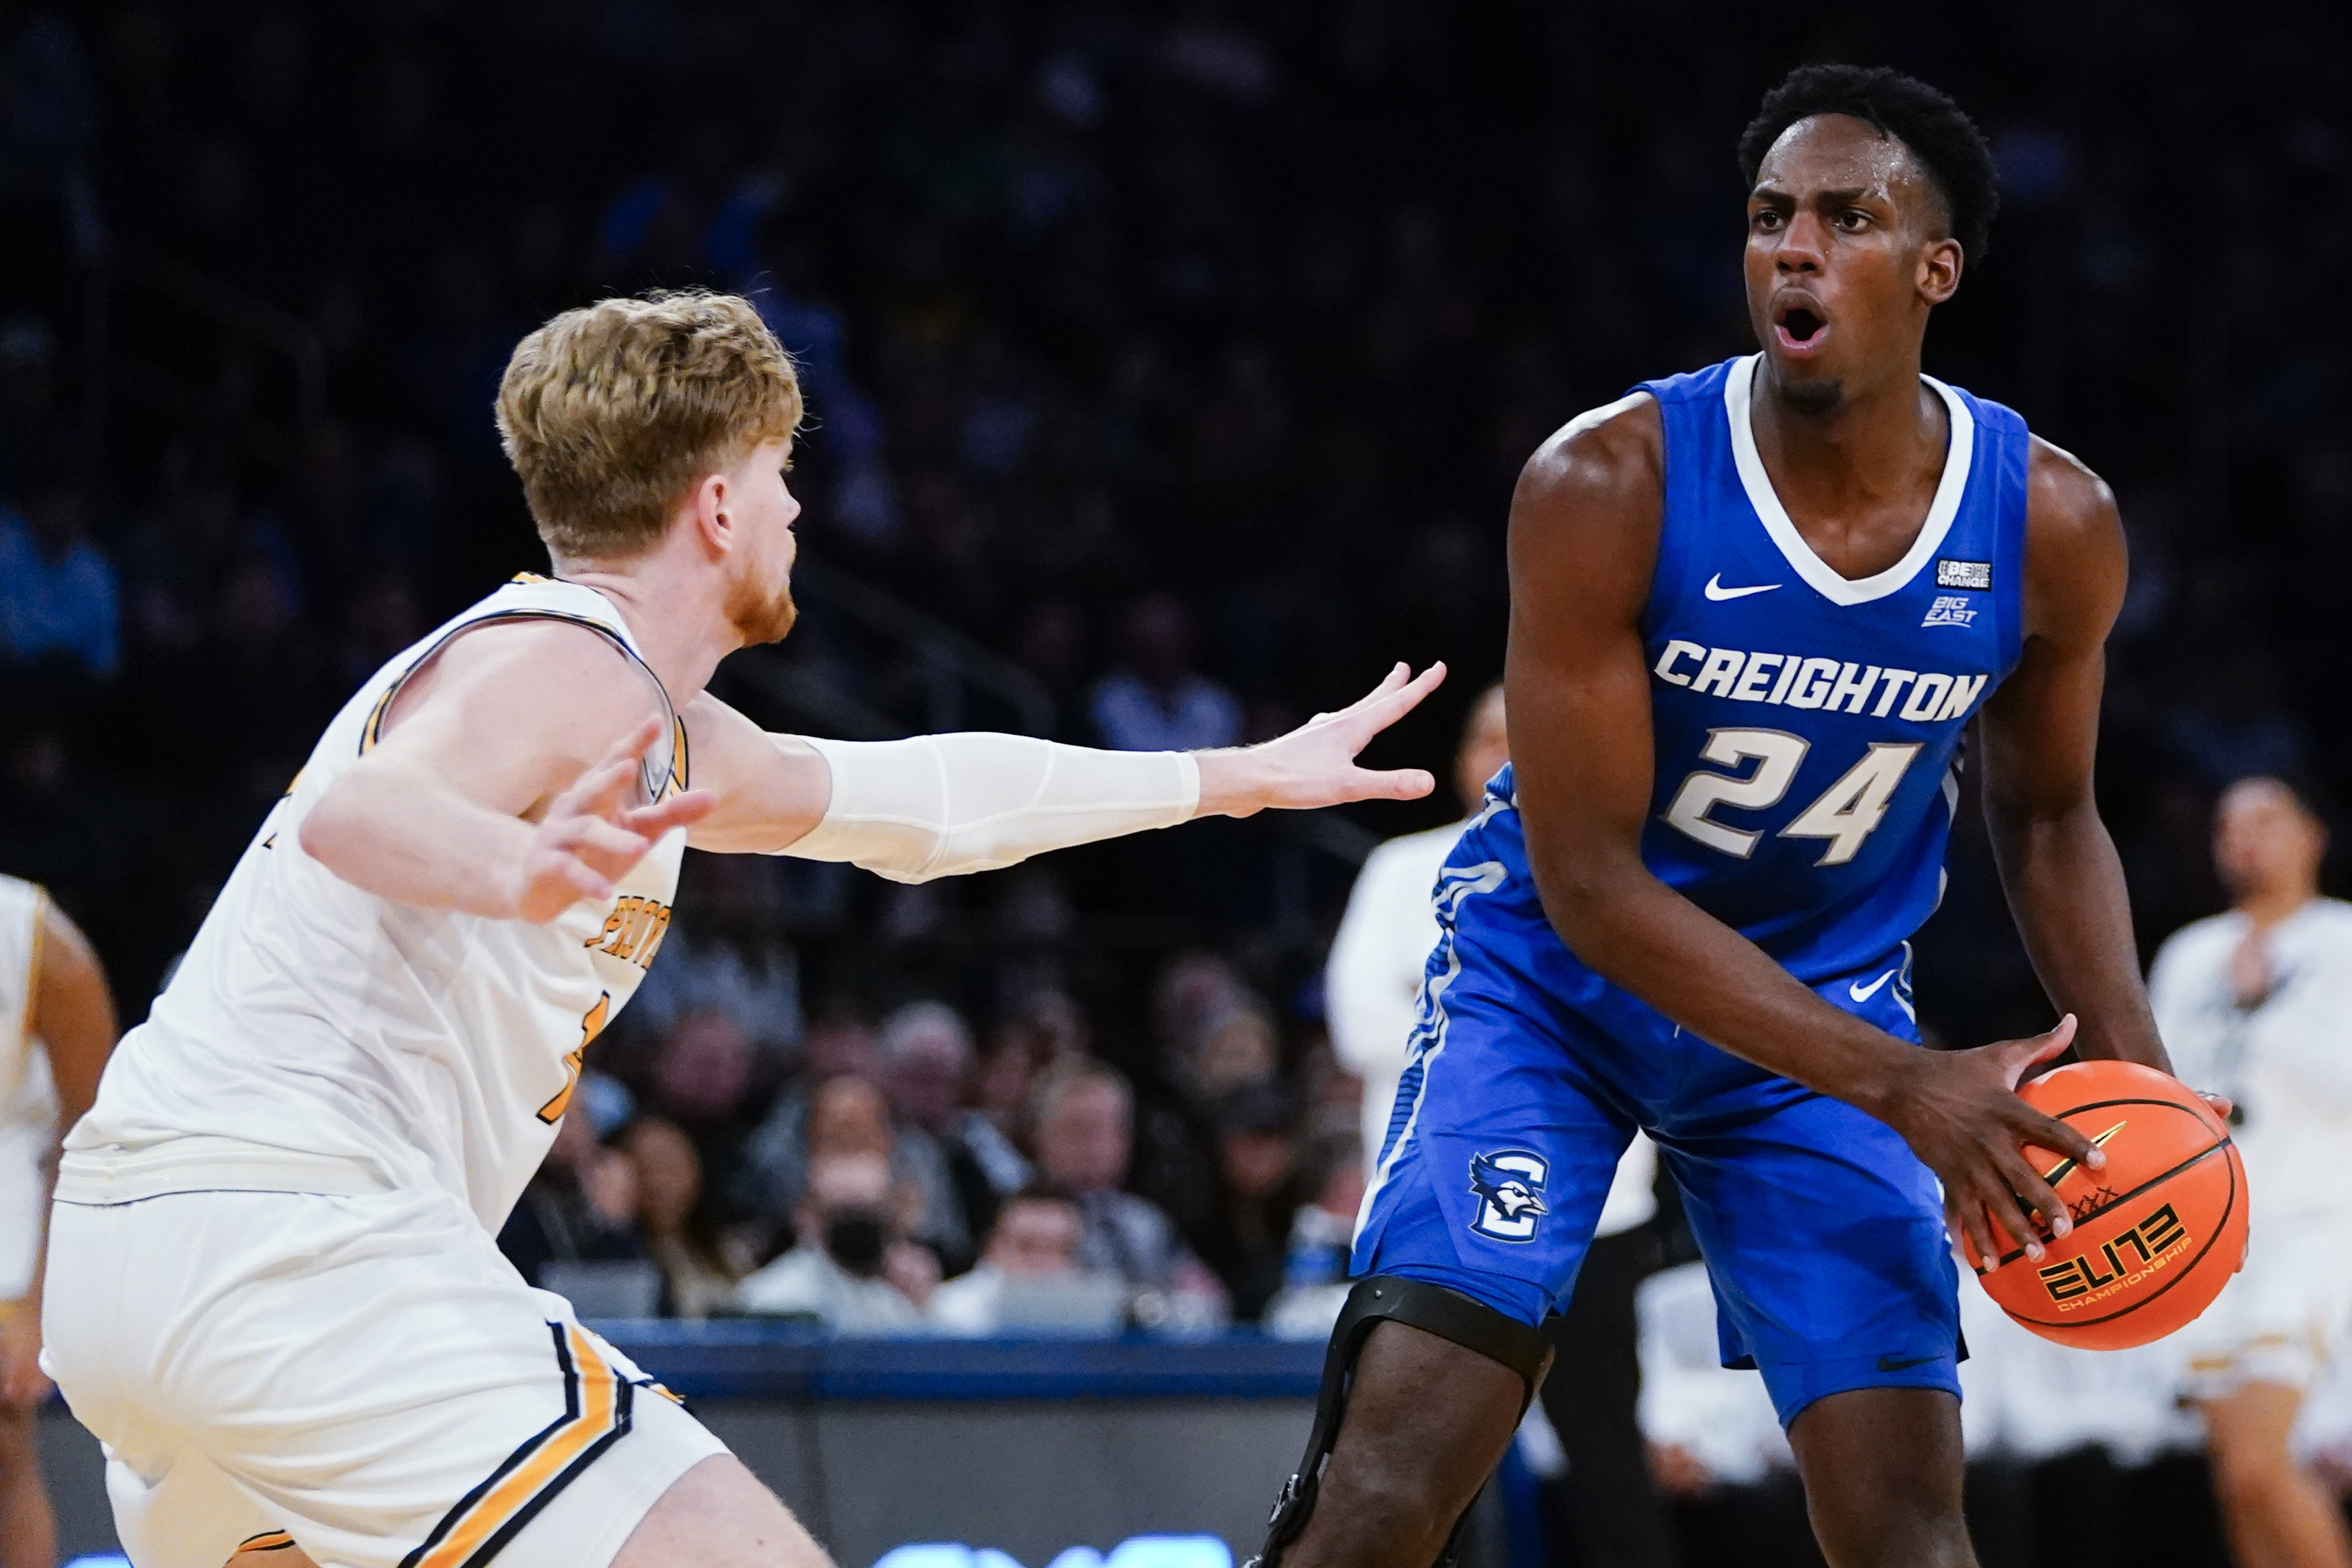 Creighton releases a very challenging non-conference schedule